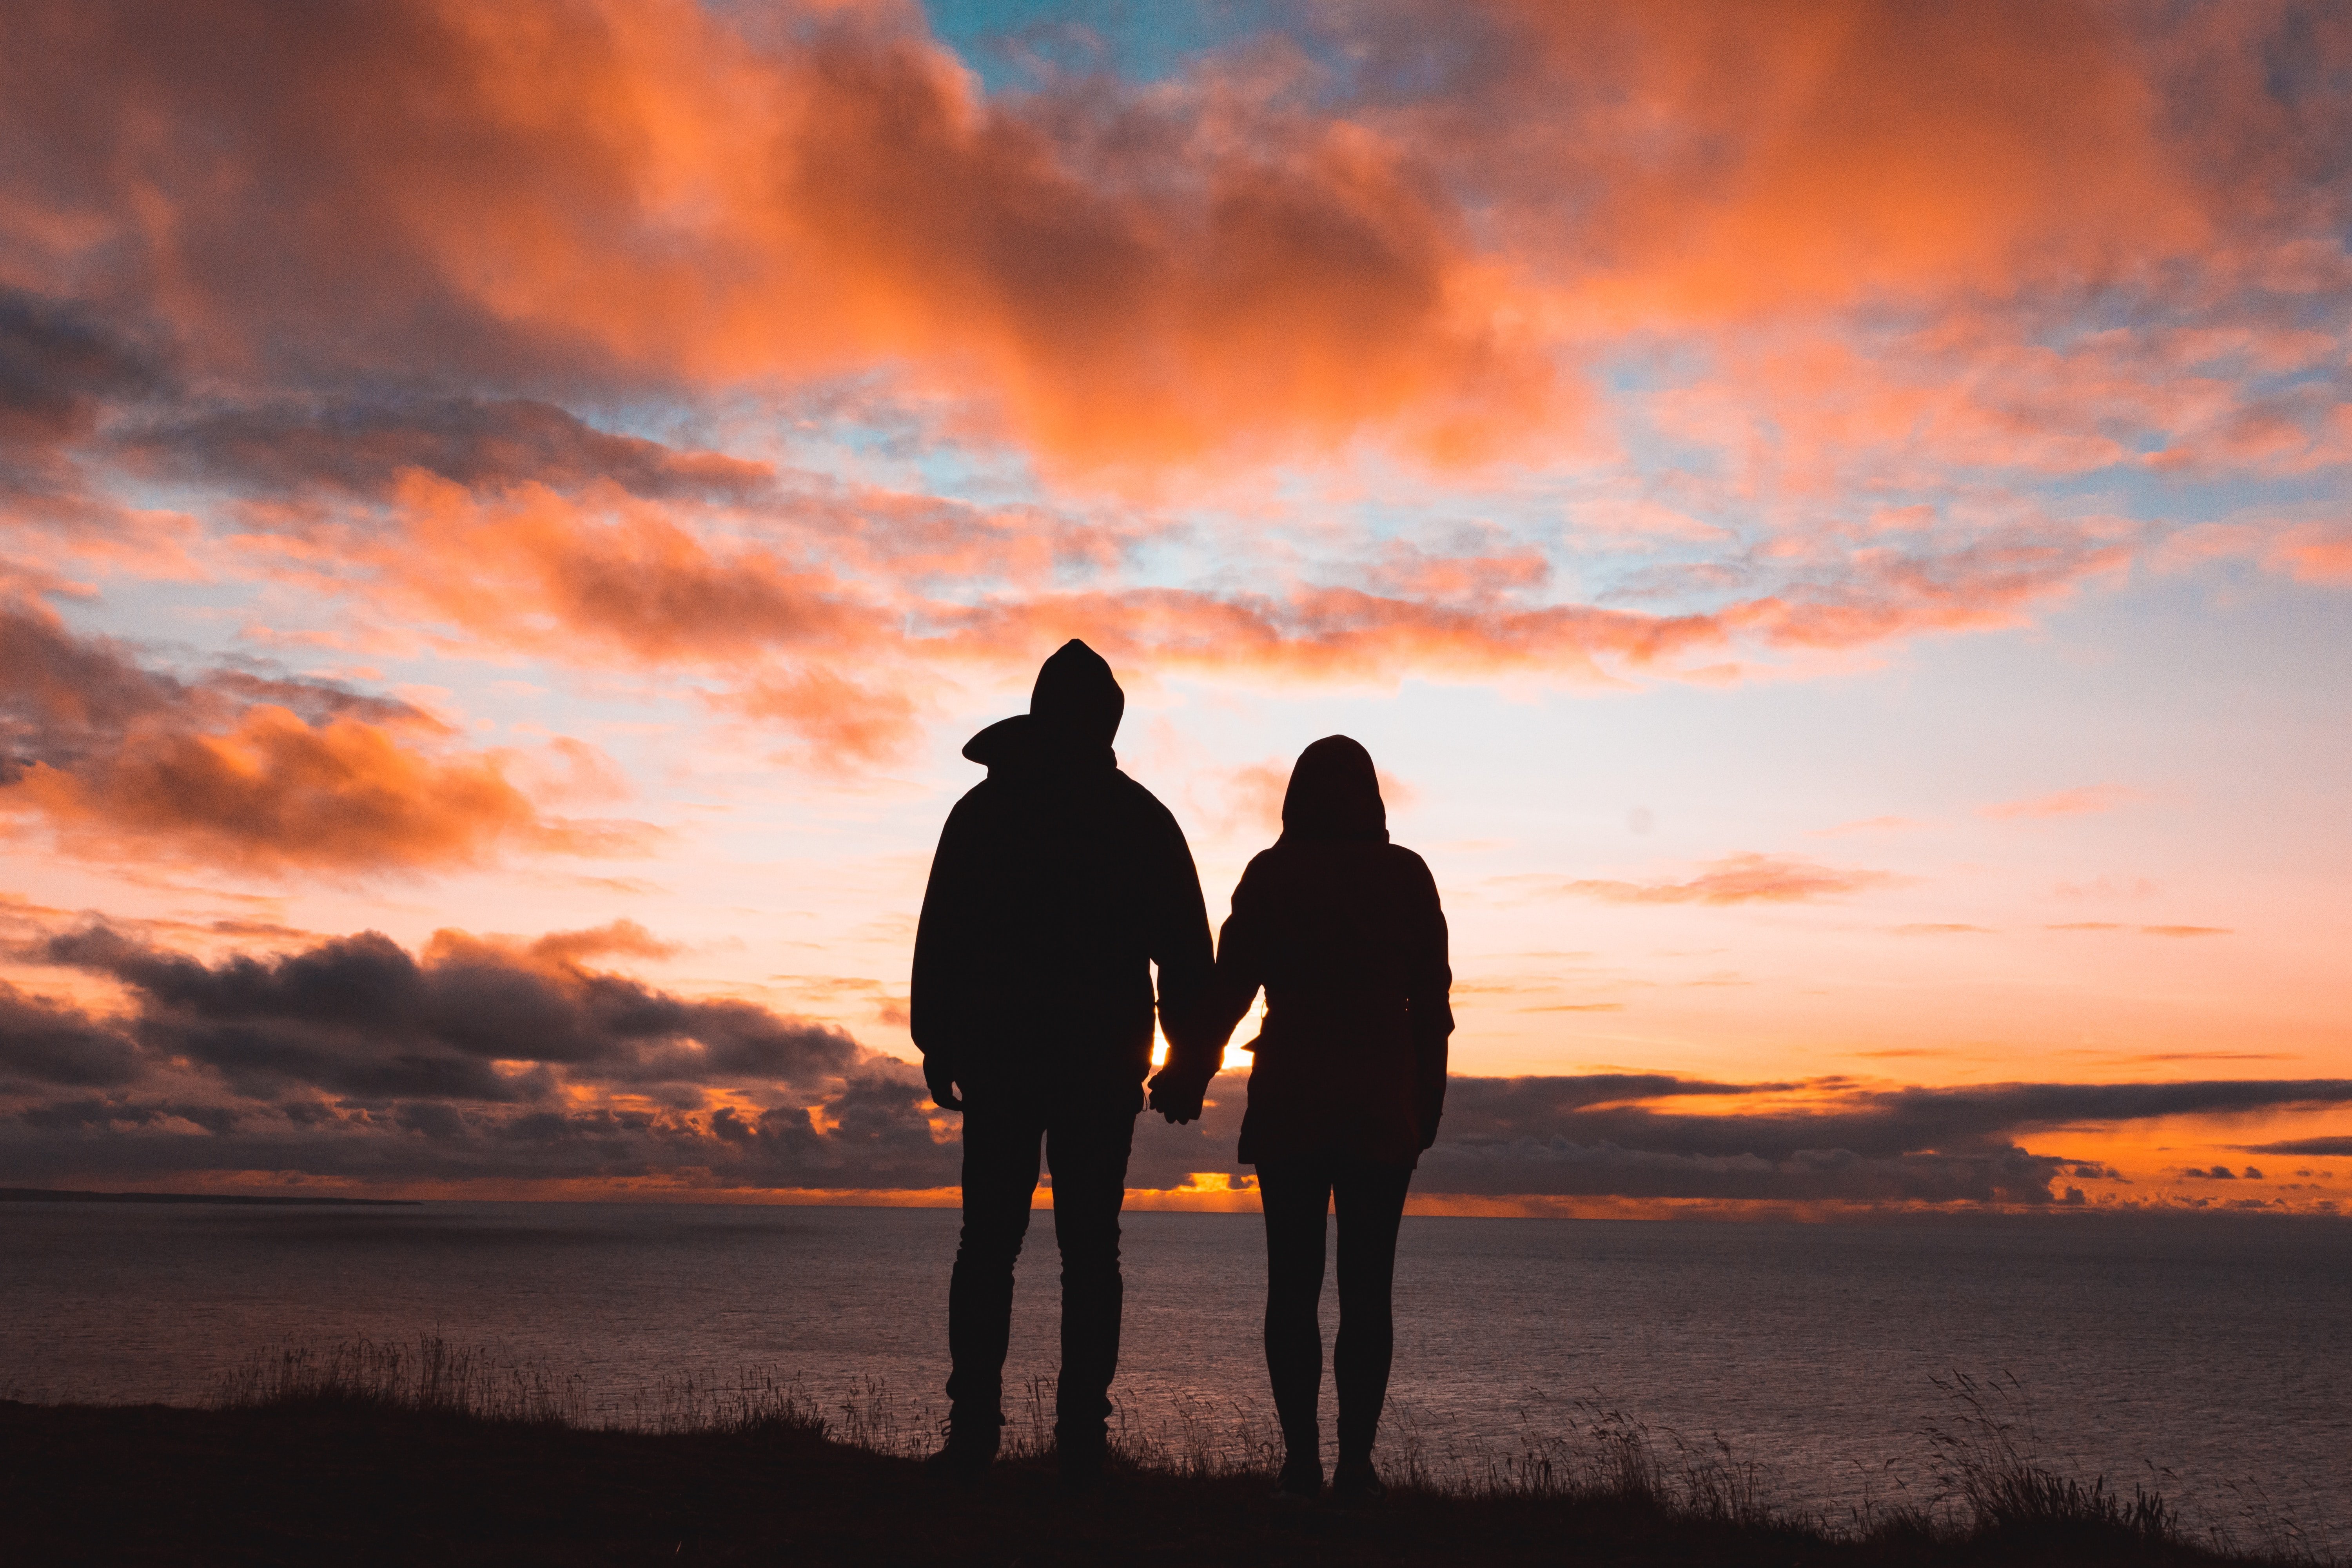 A picture of a couple at sunset. | Source: Unsplash.com